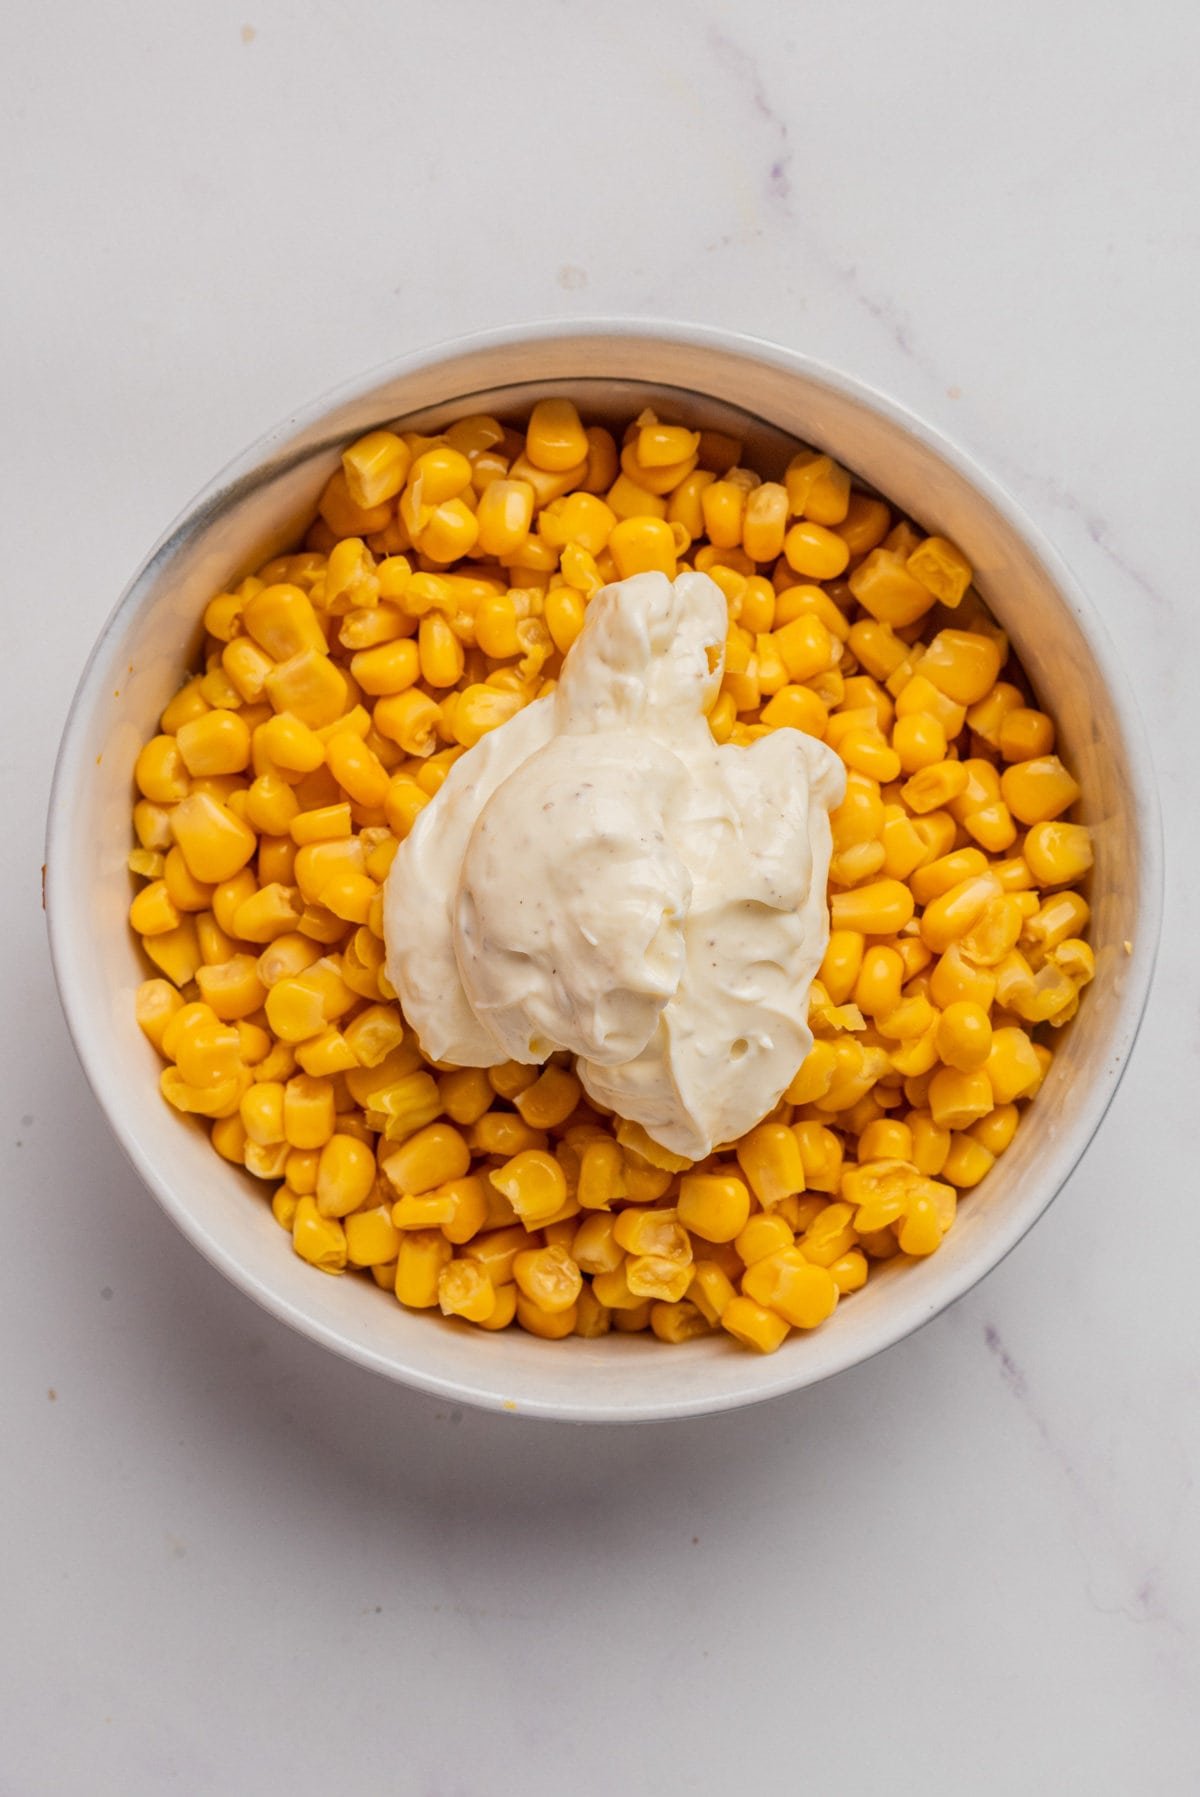 An overhead image of a bowl of corn kernels with the dressing on top, before mixing.